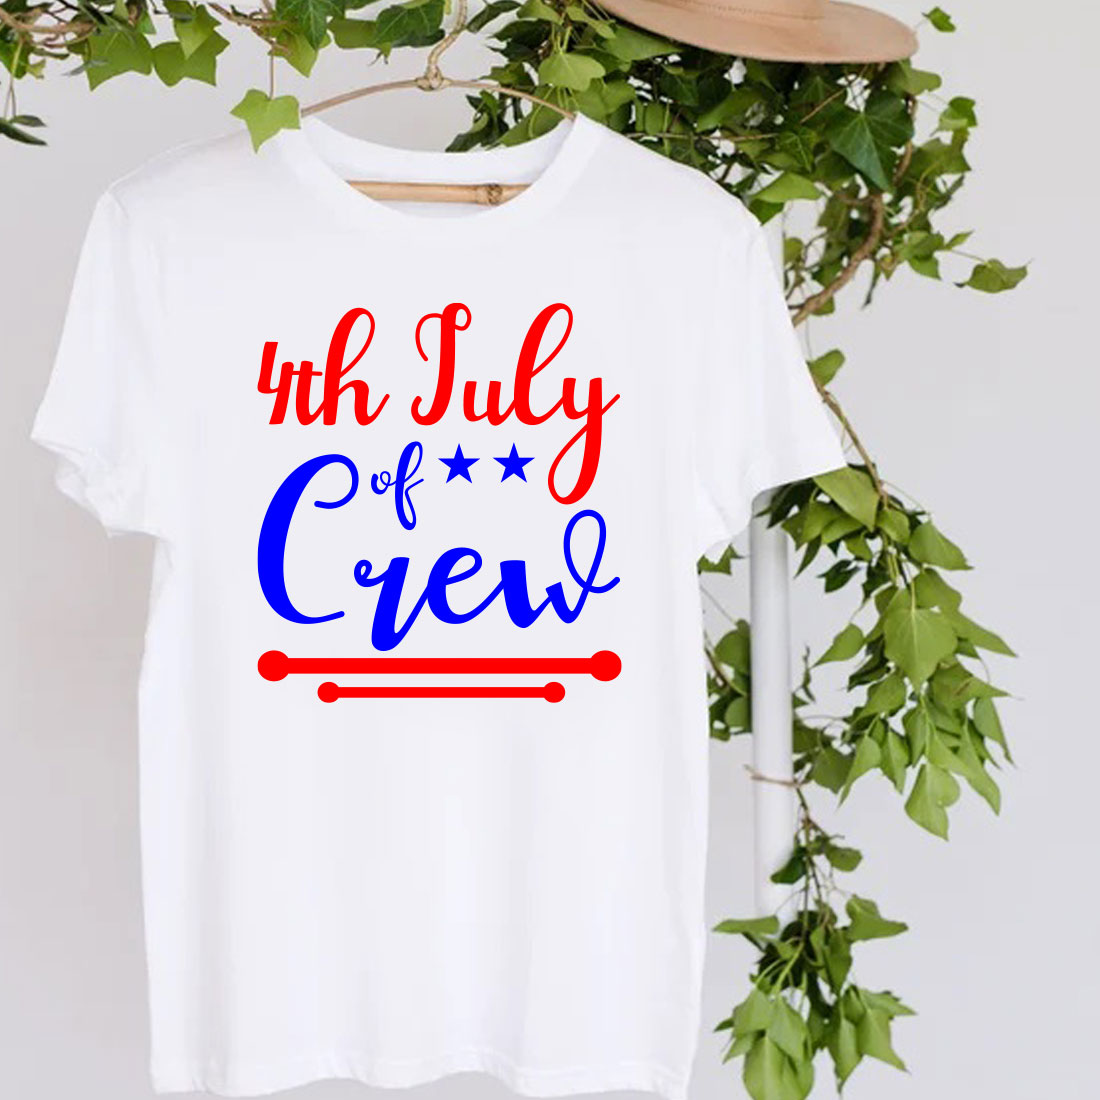 White t - shirt with the words 4th july of the crew printed on it.